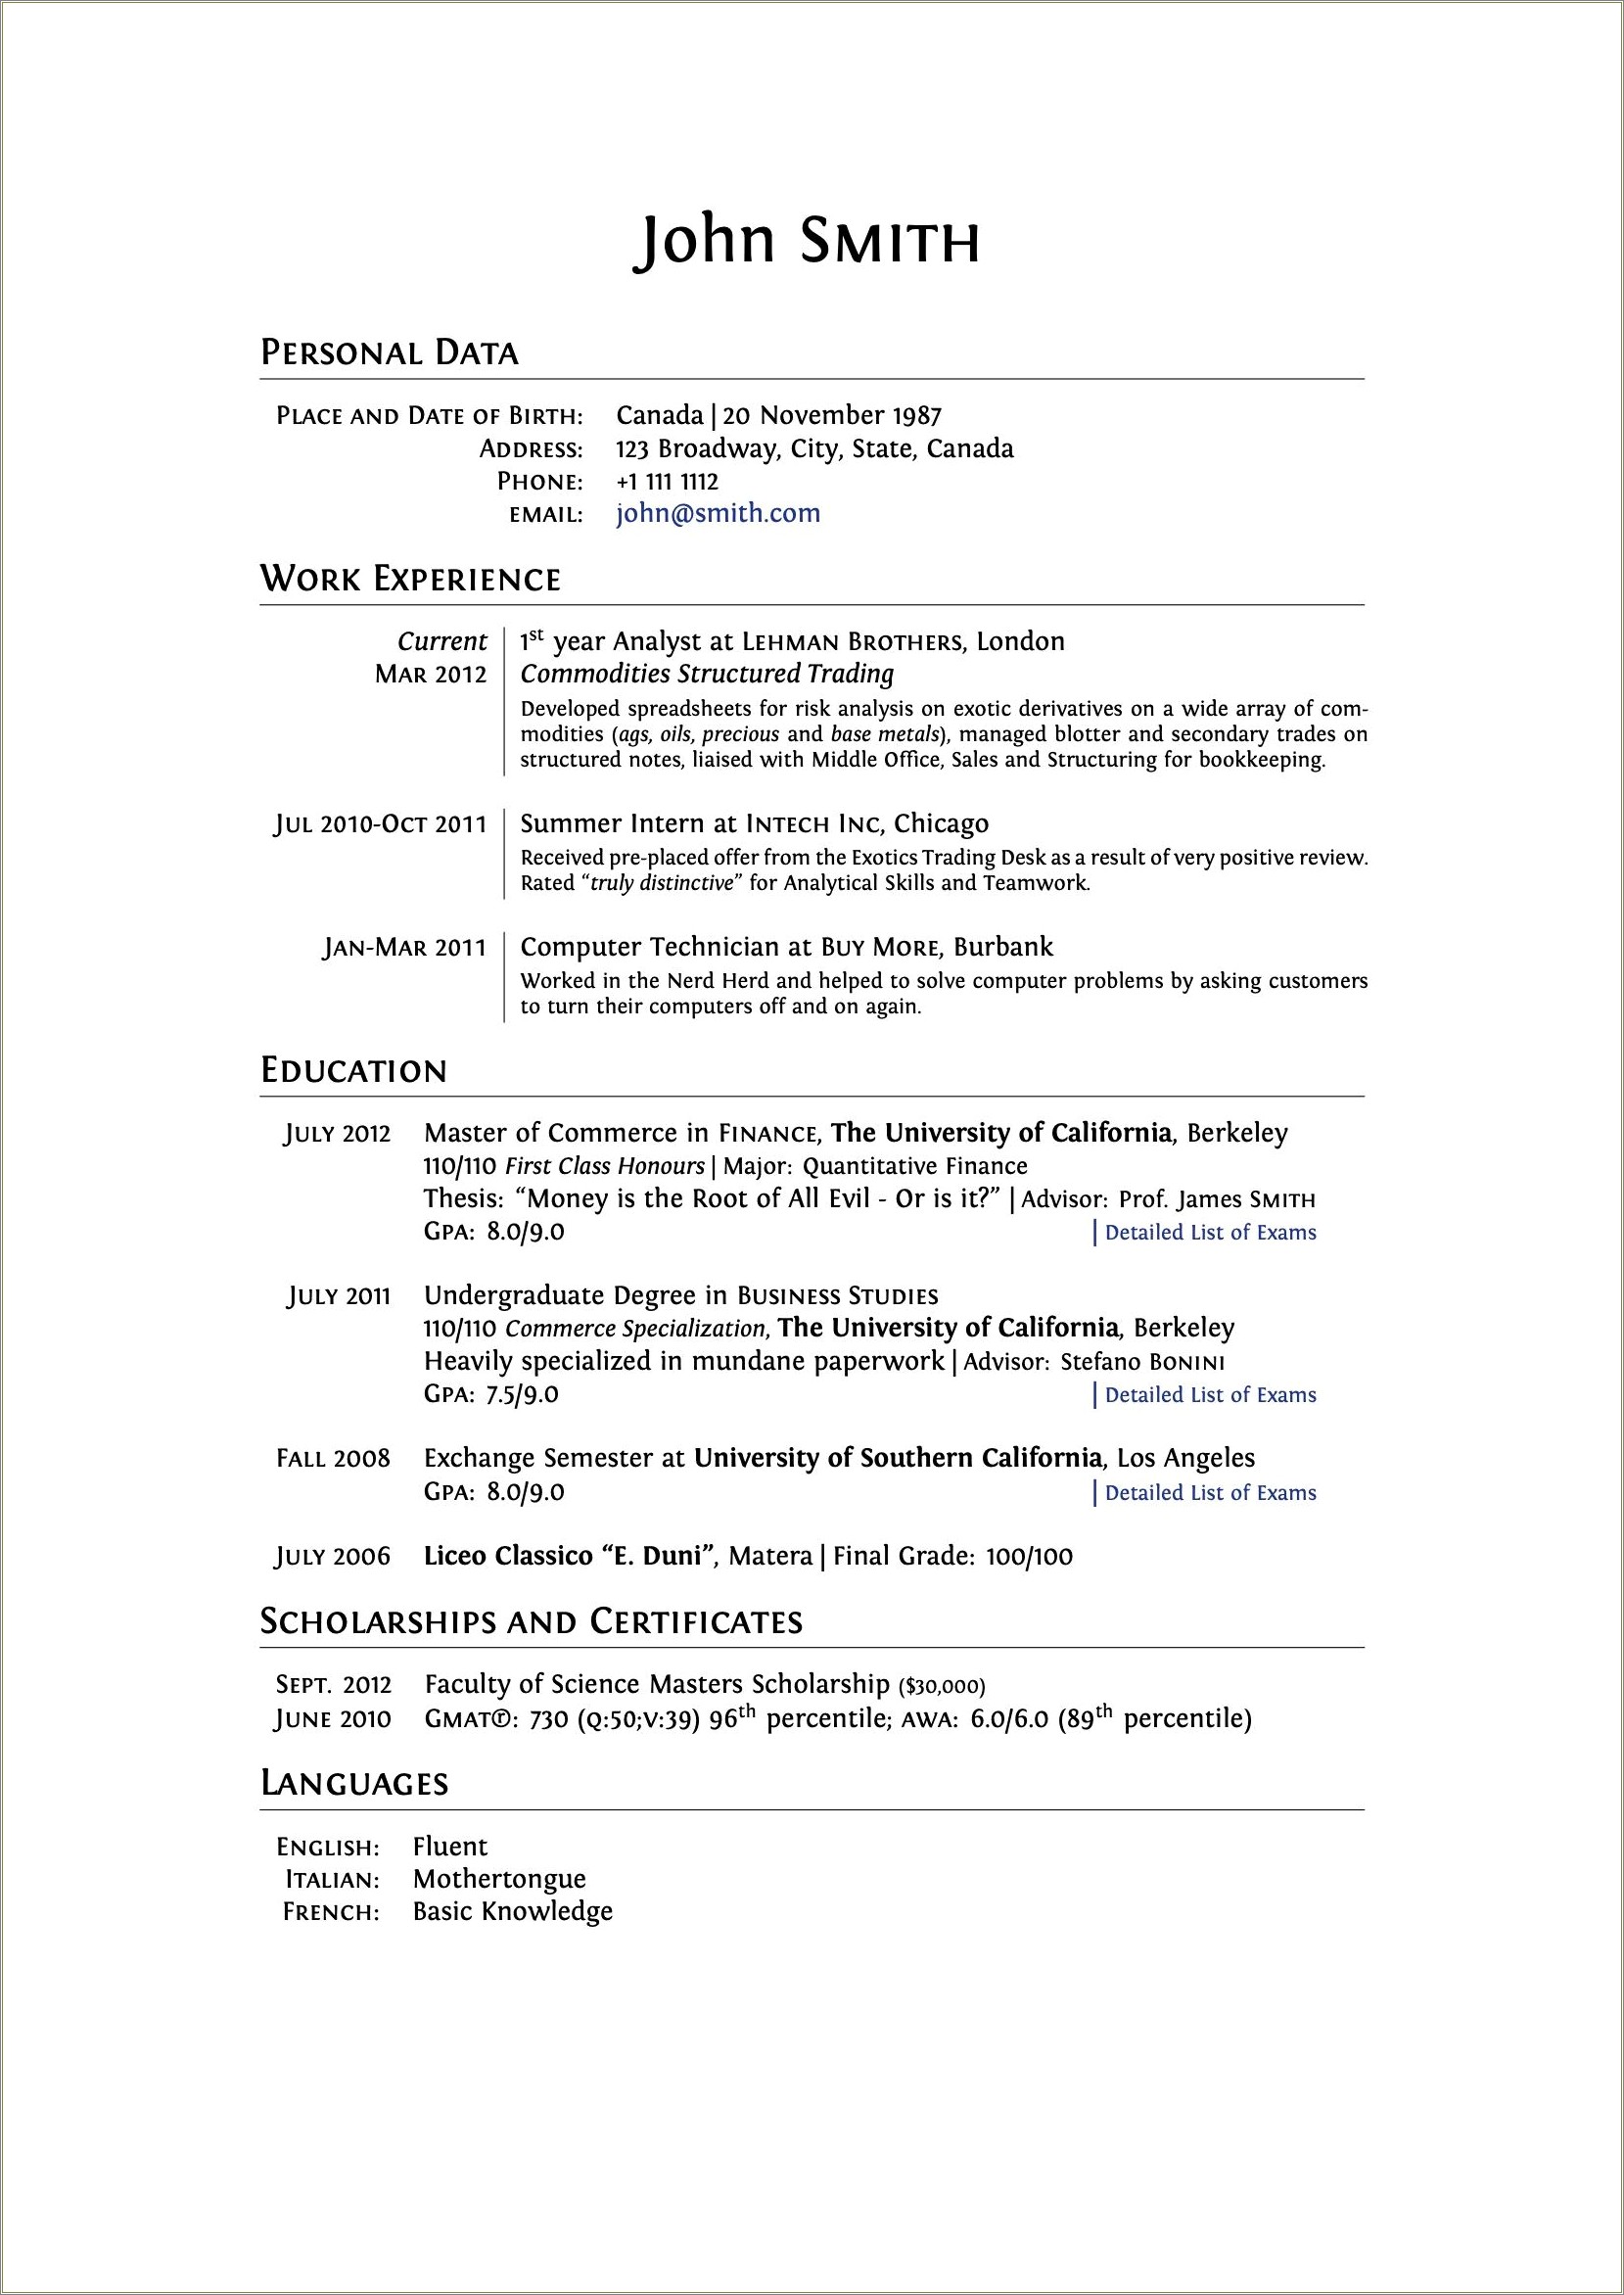 Resume Sample For Fresh Graduate With Character References